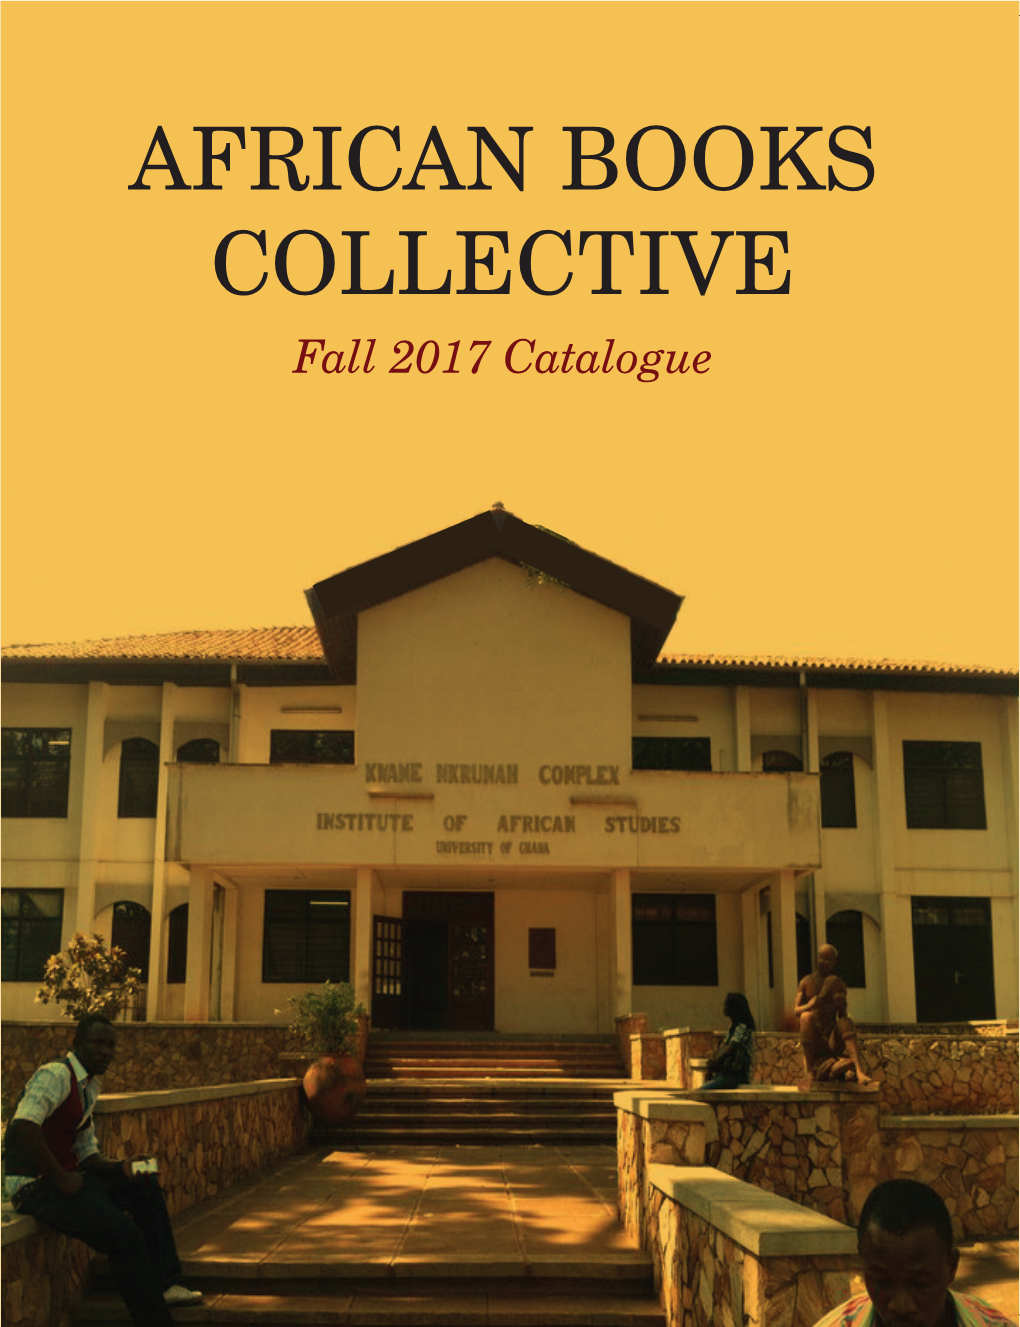 AFRICAN BOOKS COLLECTIVE Fall 2017 Catalogue